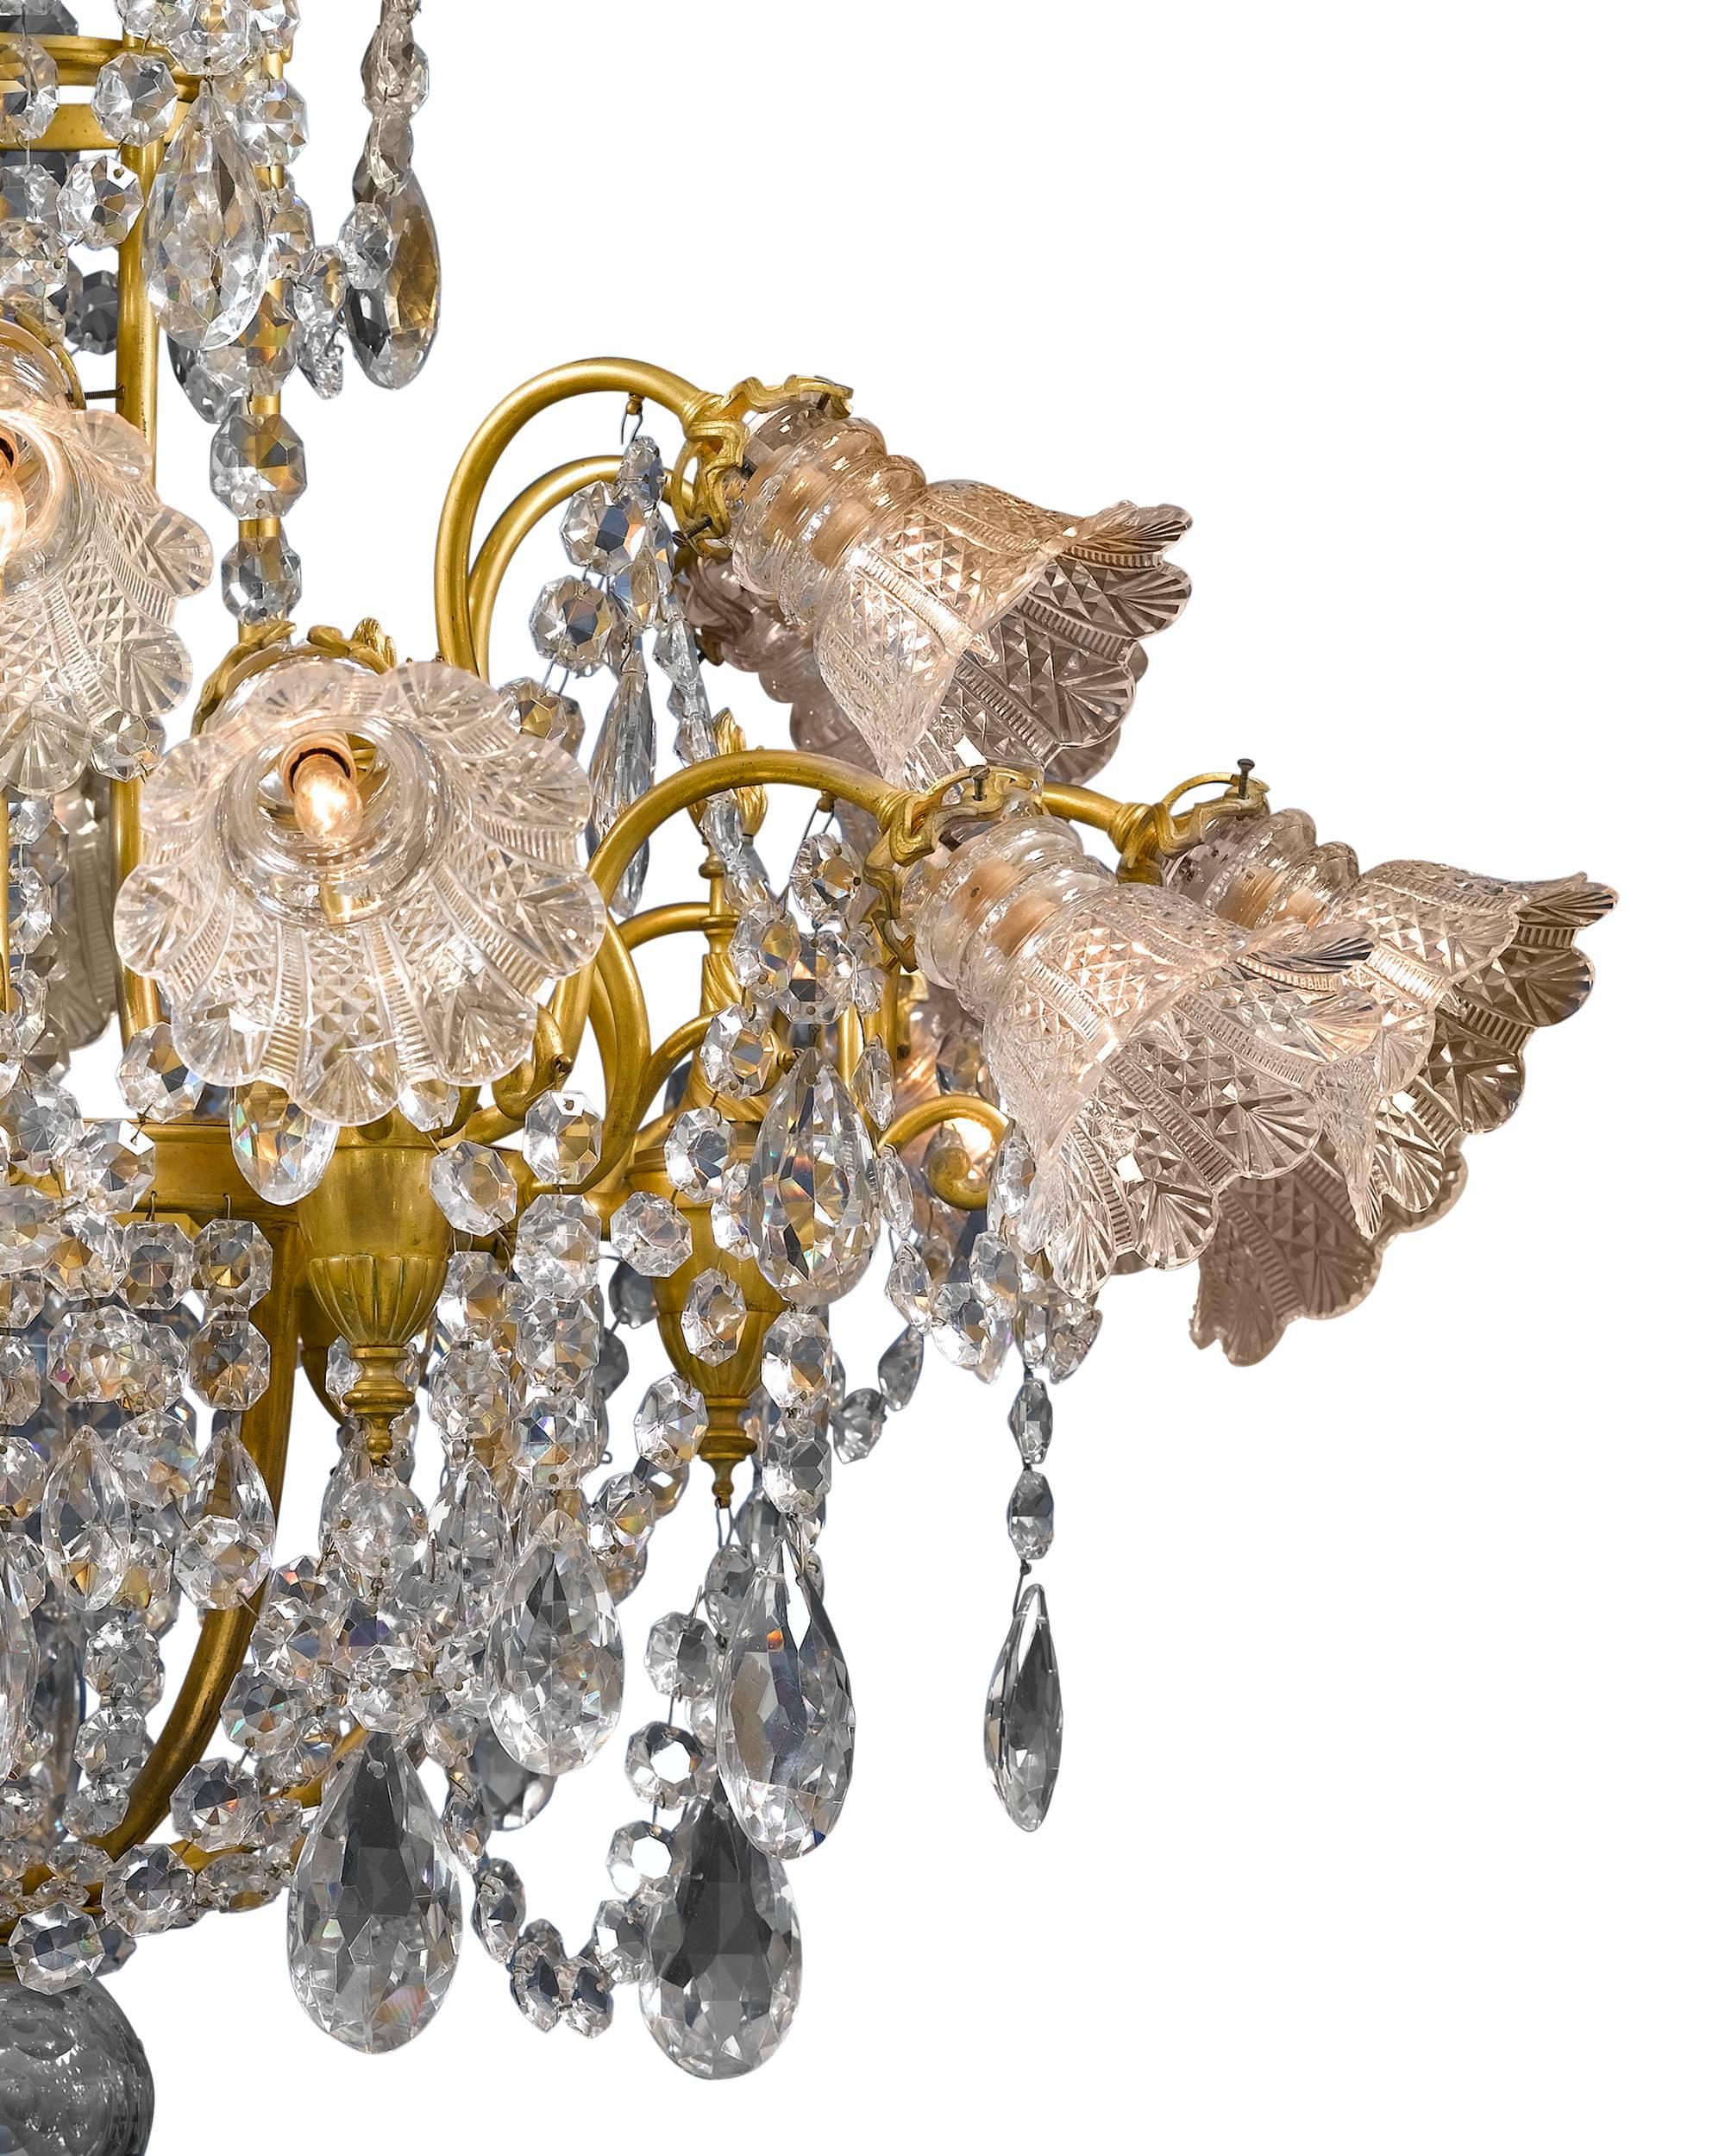 French Eighteen-Light Baccarat Crystal Chandelier For Sale